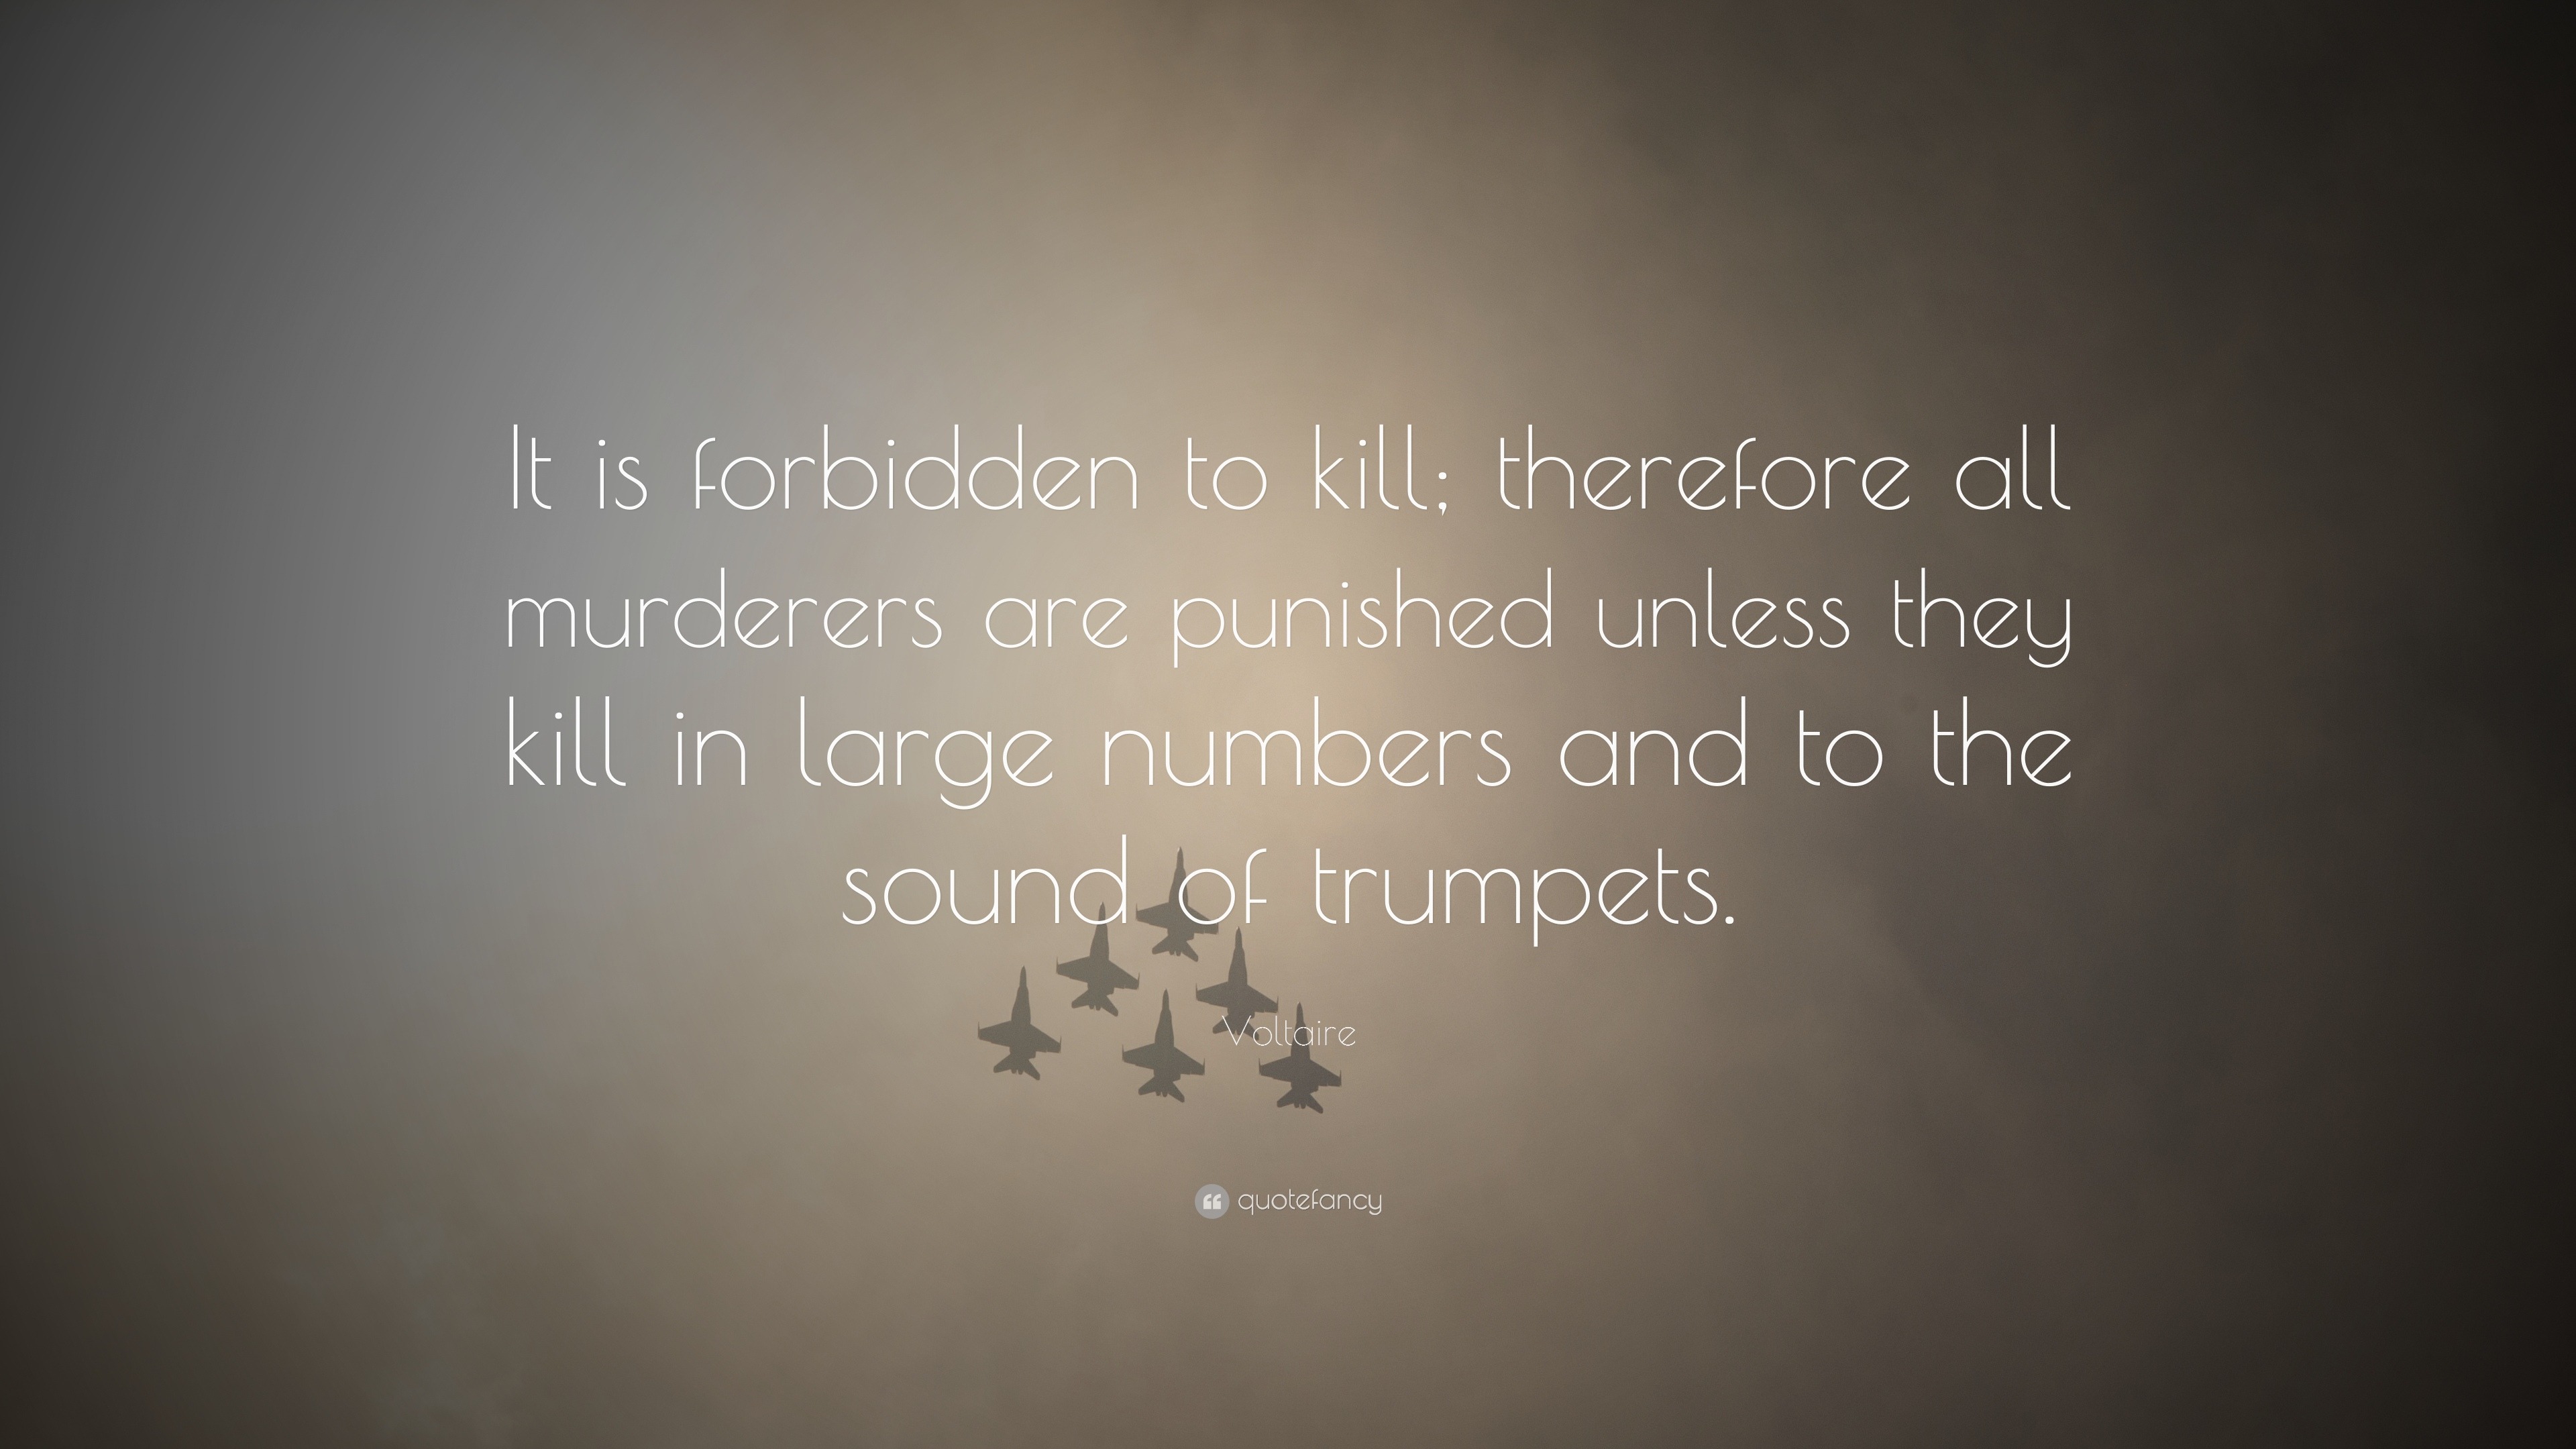 Voltaire Quote “It is forbidden to kill therefore all murderers are punished unless